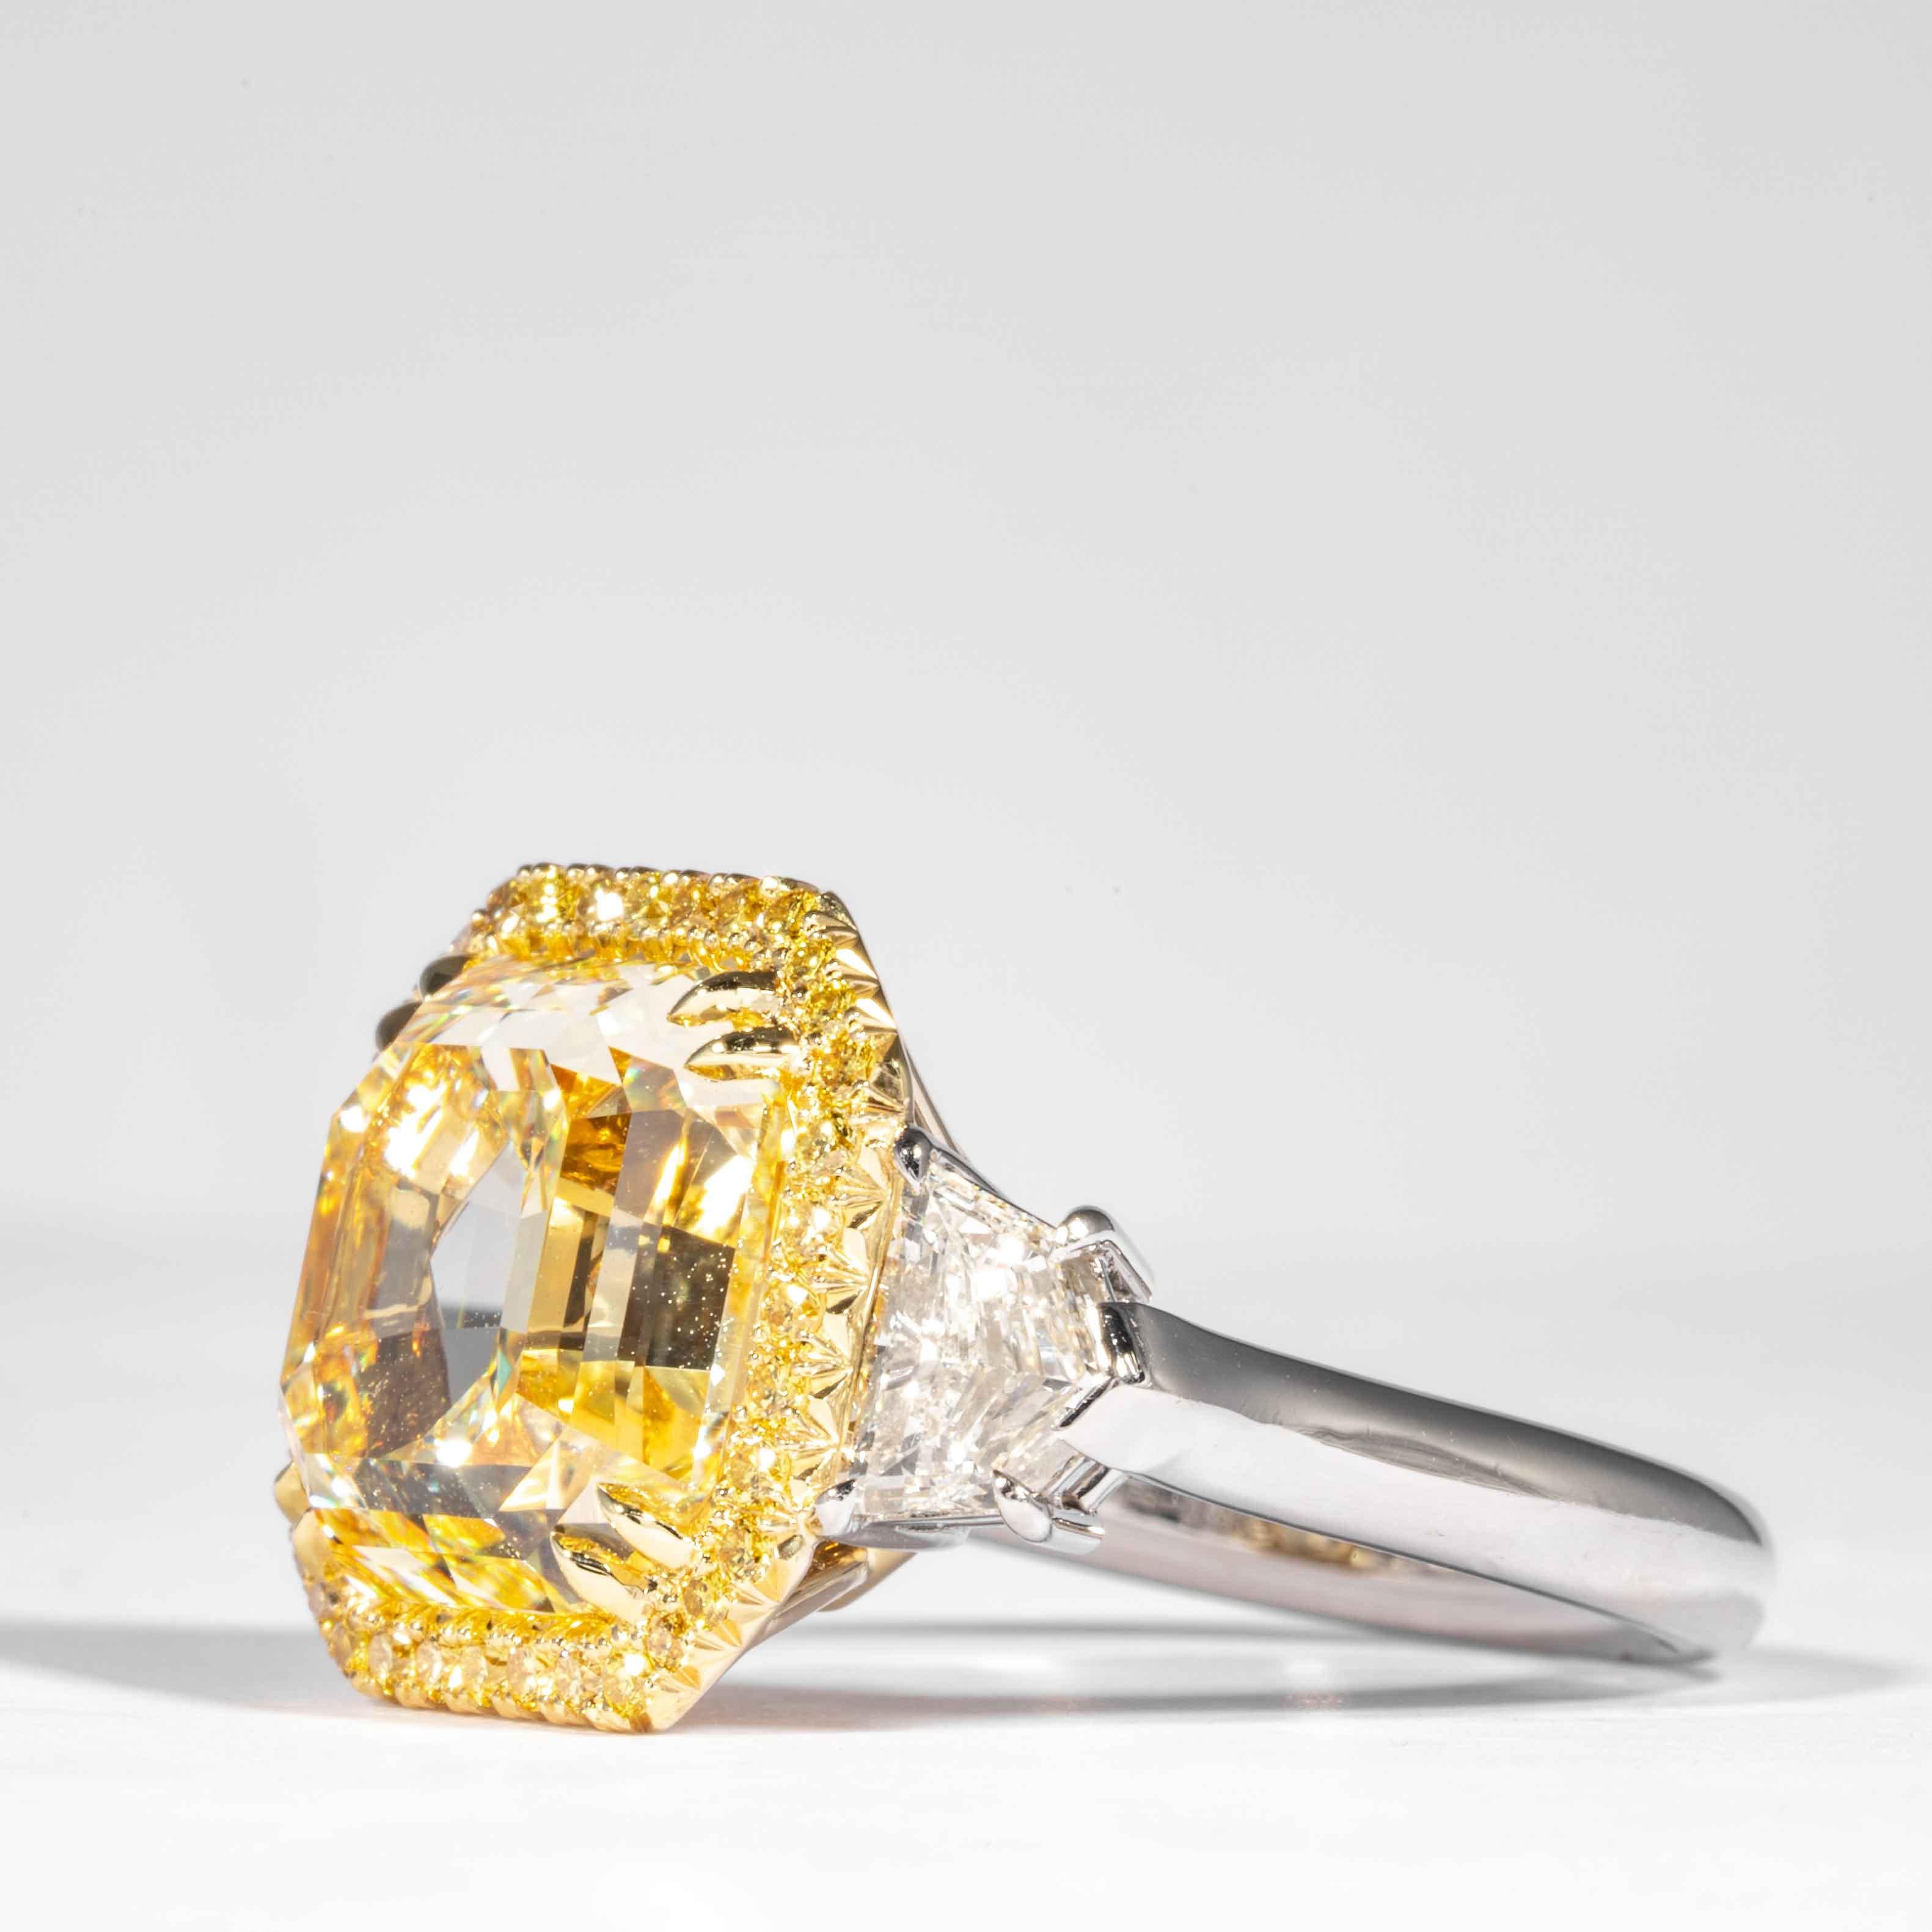 Shreve, Crump & Low GIA Certified 8.02 Carat Fancy Yellow Asscher Diamond Ring In New Condition For Sale In Boston, MA